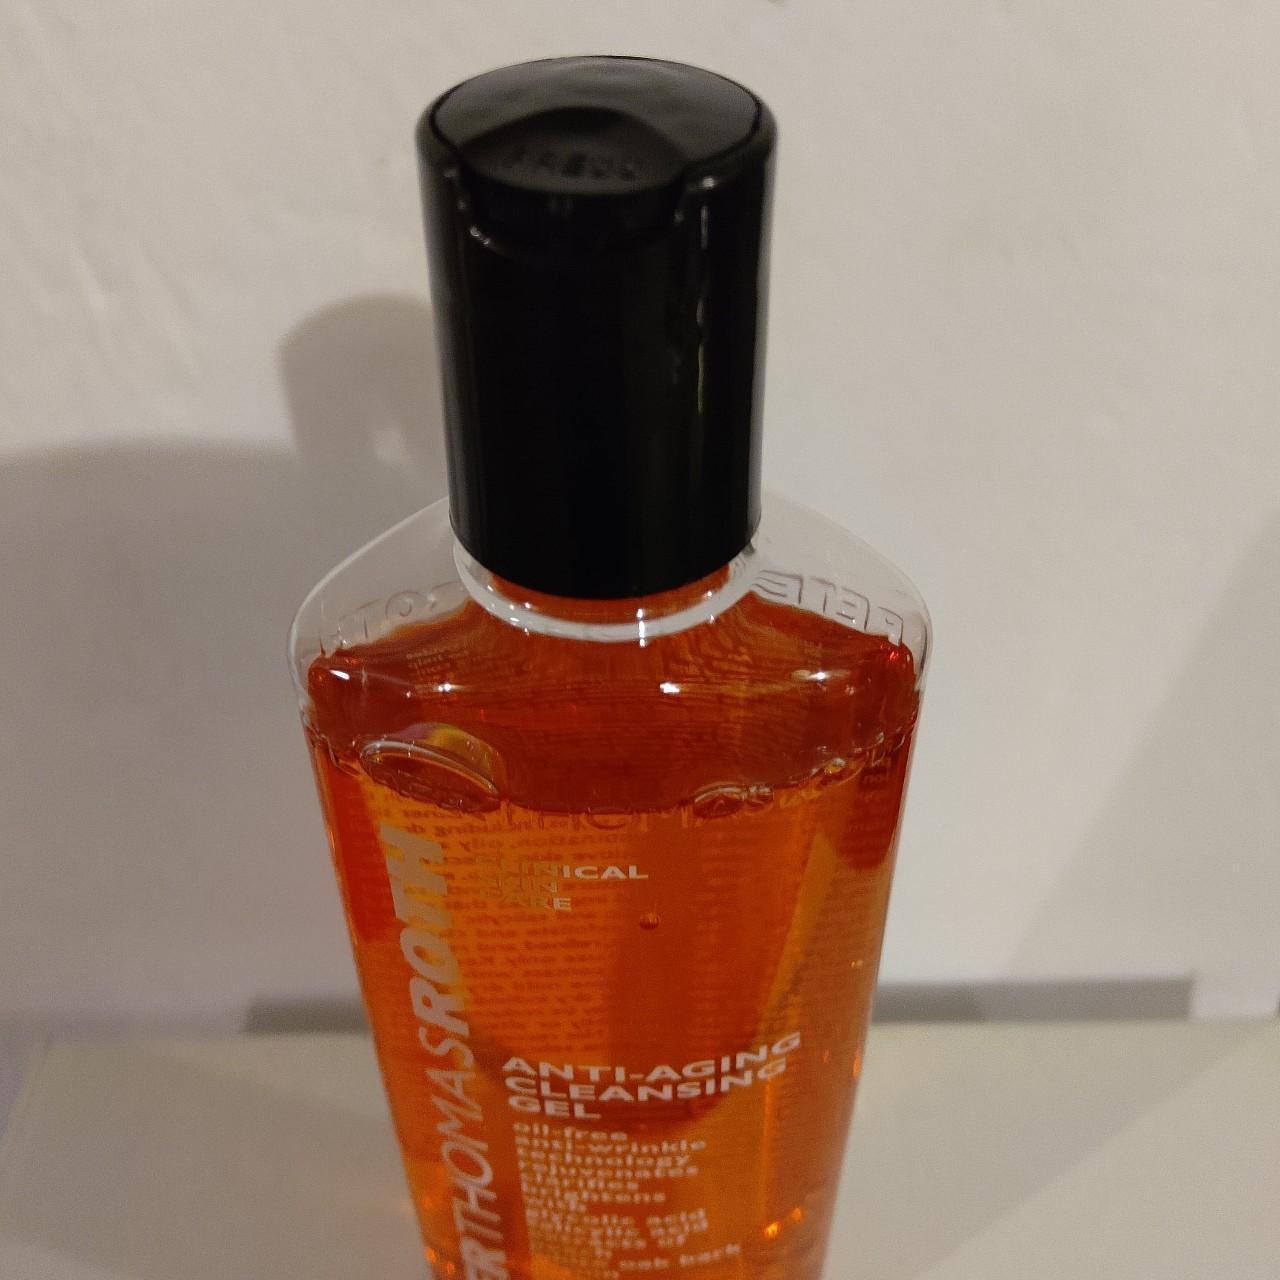 Product Image 3 - Peter Thomas Roth Anti-Aging Cleansing